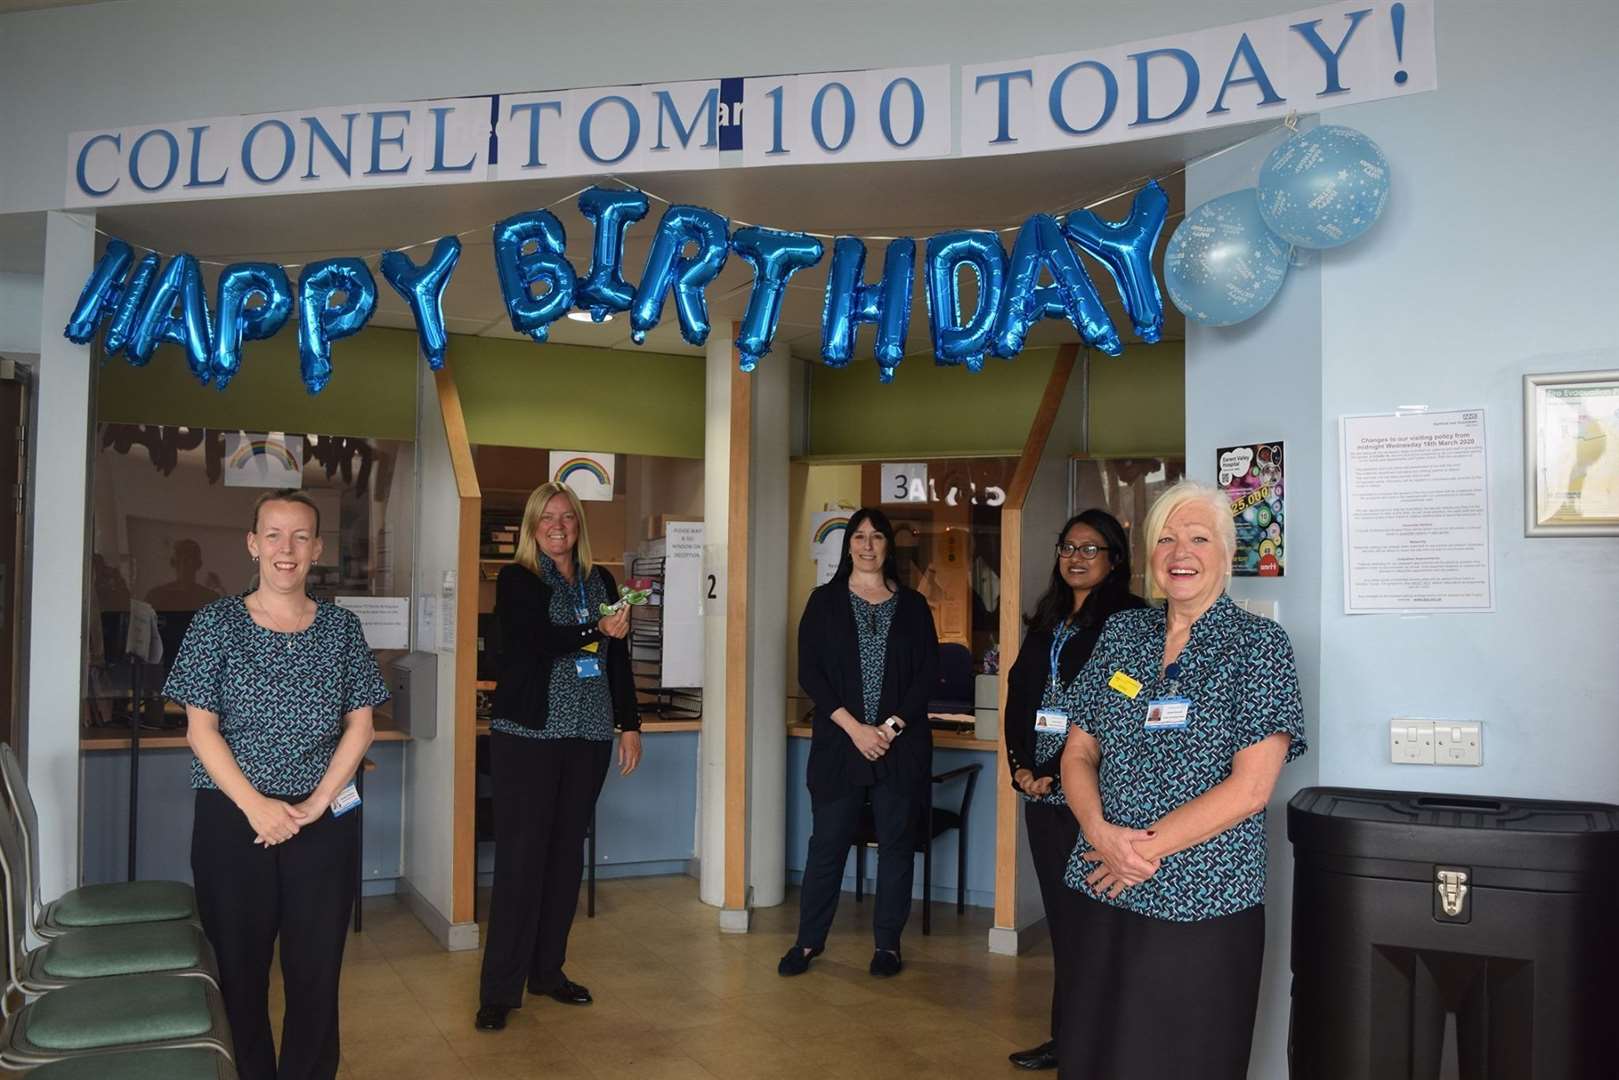 Staff at Darent Valley Hospital with their birthday banner for Captain Tom Moore. Picture: Darent Valley Hospital on Facebook